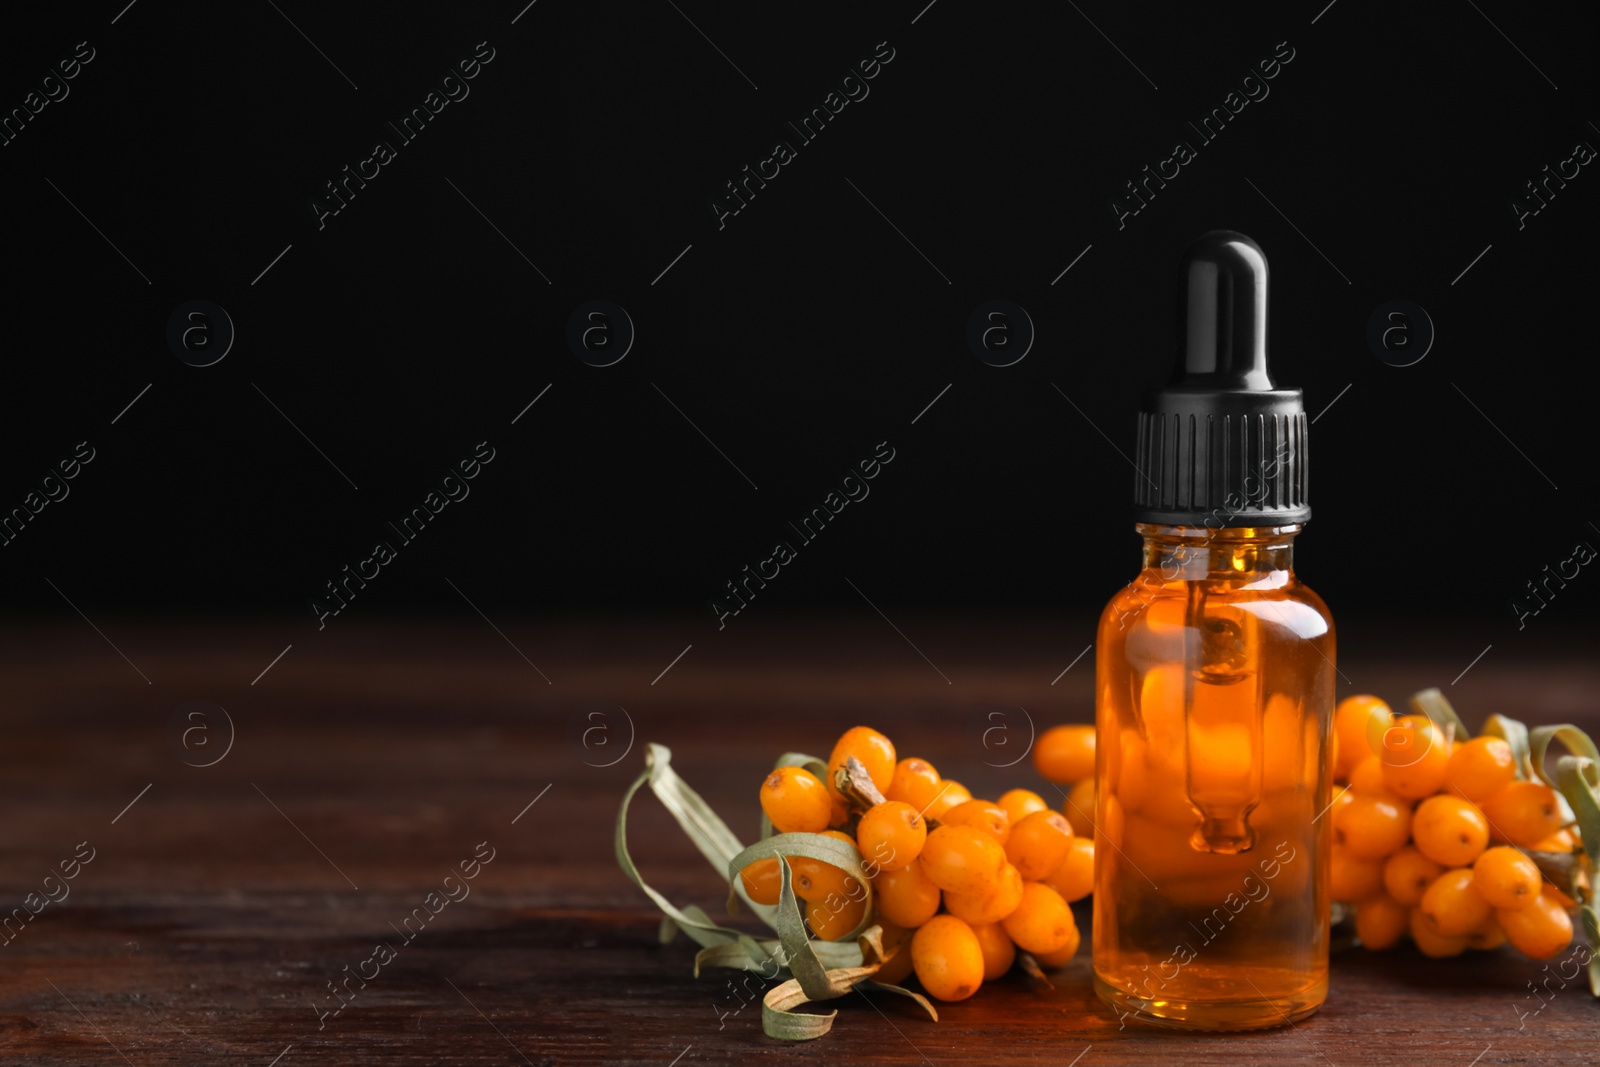 Photo of Ripe sea buckthorn and bottle of essential oil on wooden table against black background. Space for text